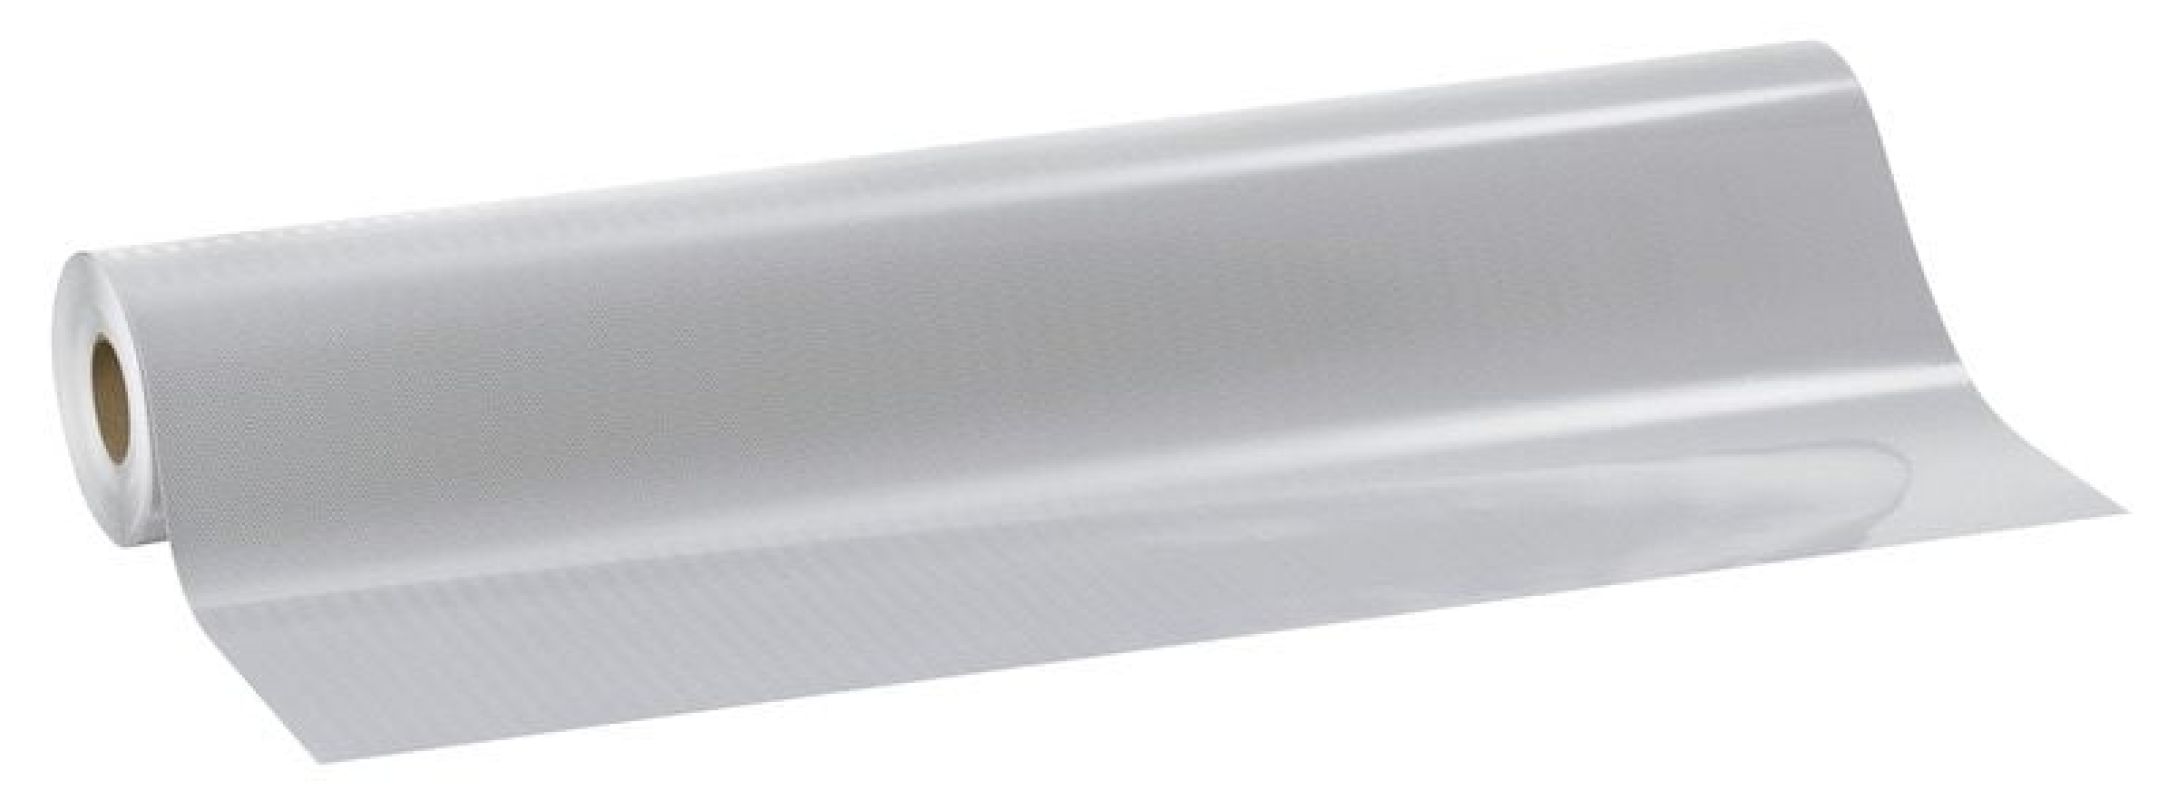 3M™ High Intensity Metalized Flexible Prismatic Vehicle Marking 823i-10, White, 1220 mm x 45.7 m